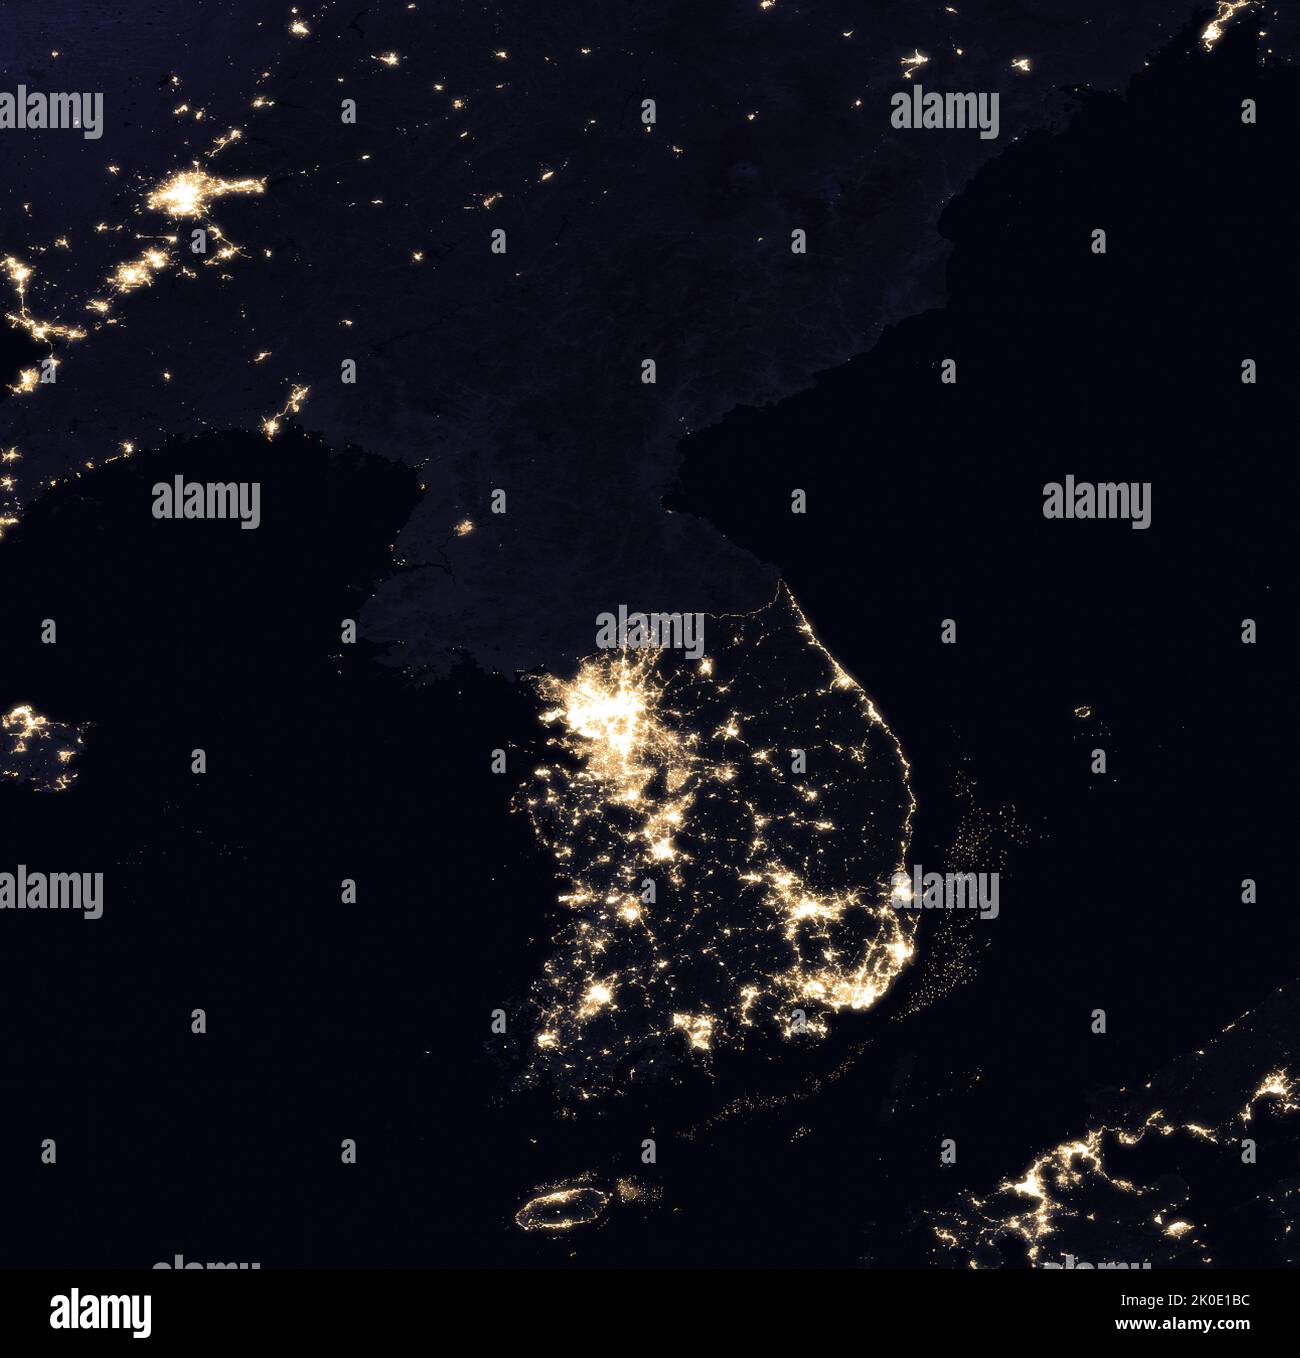 Korean peninsula and Chinese border areas at night. The stark contrast is evident in this 2016 satellite image of the abundance of city lights in South Korea and the absence of electric power in North Korea. Stock Photo